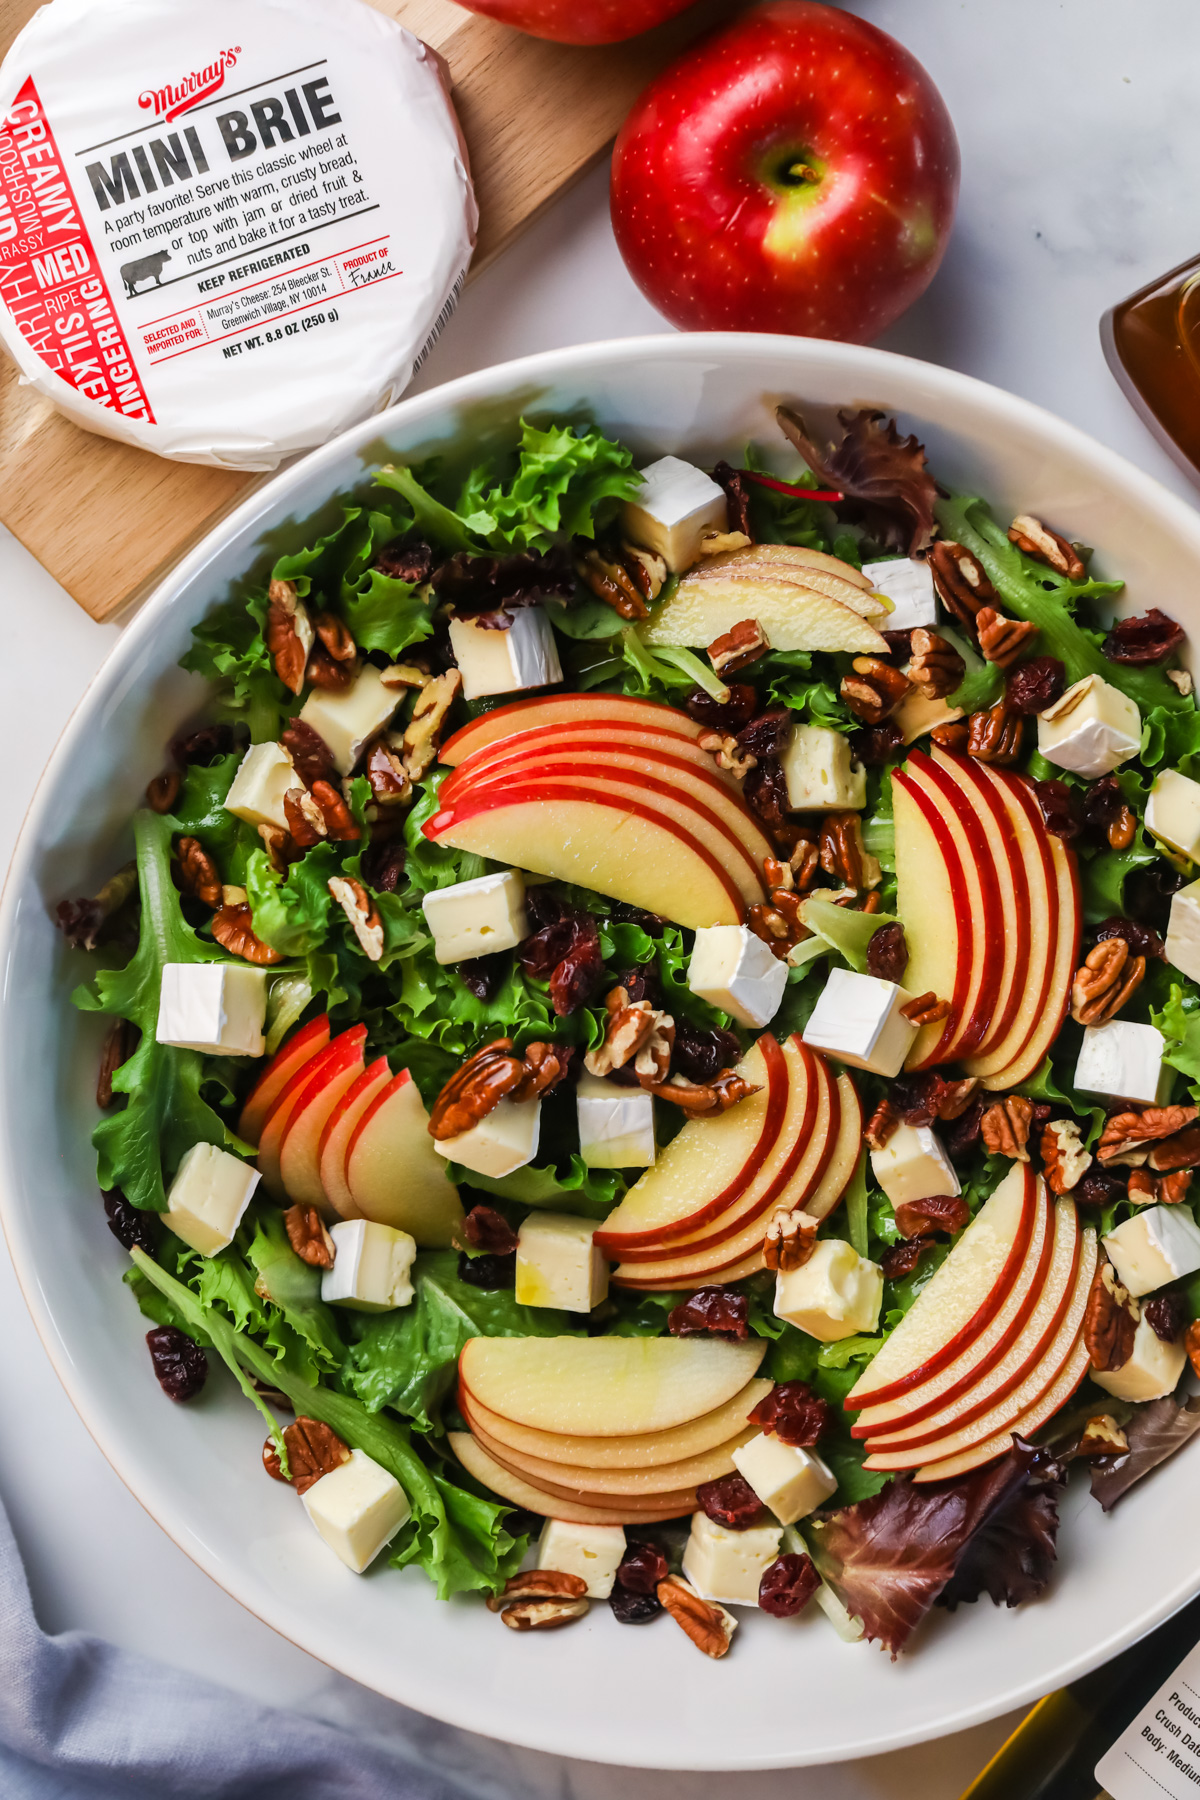 Apple brie salad with dijon dressing.